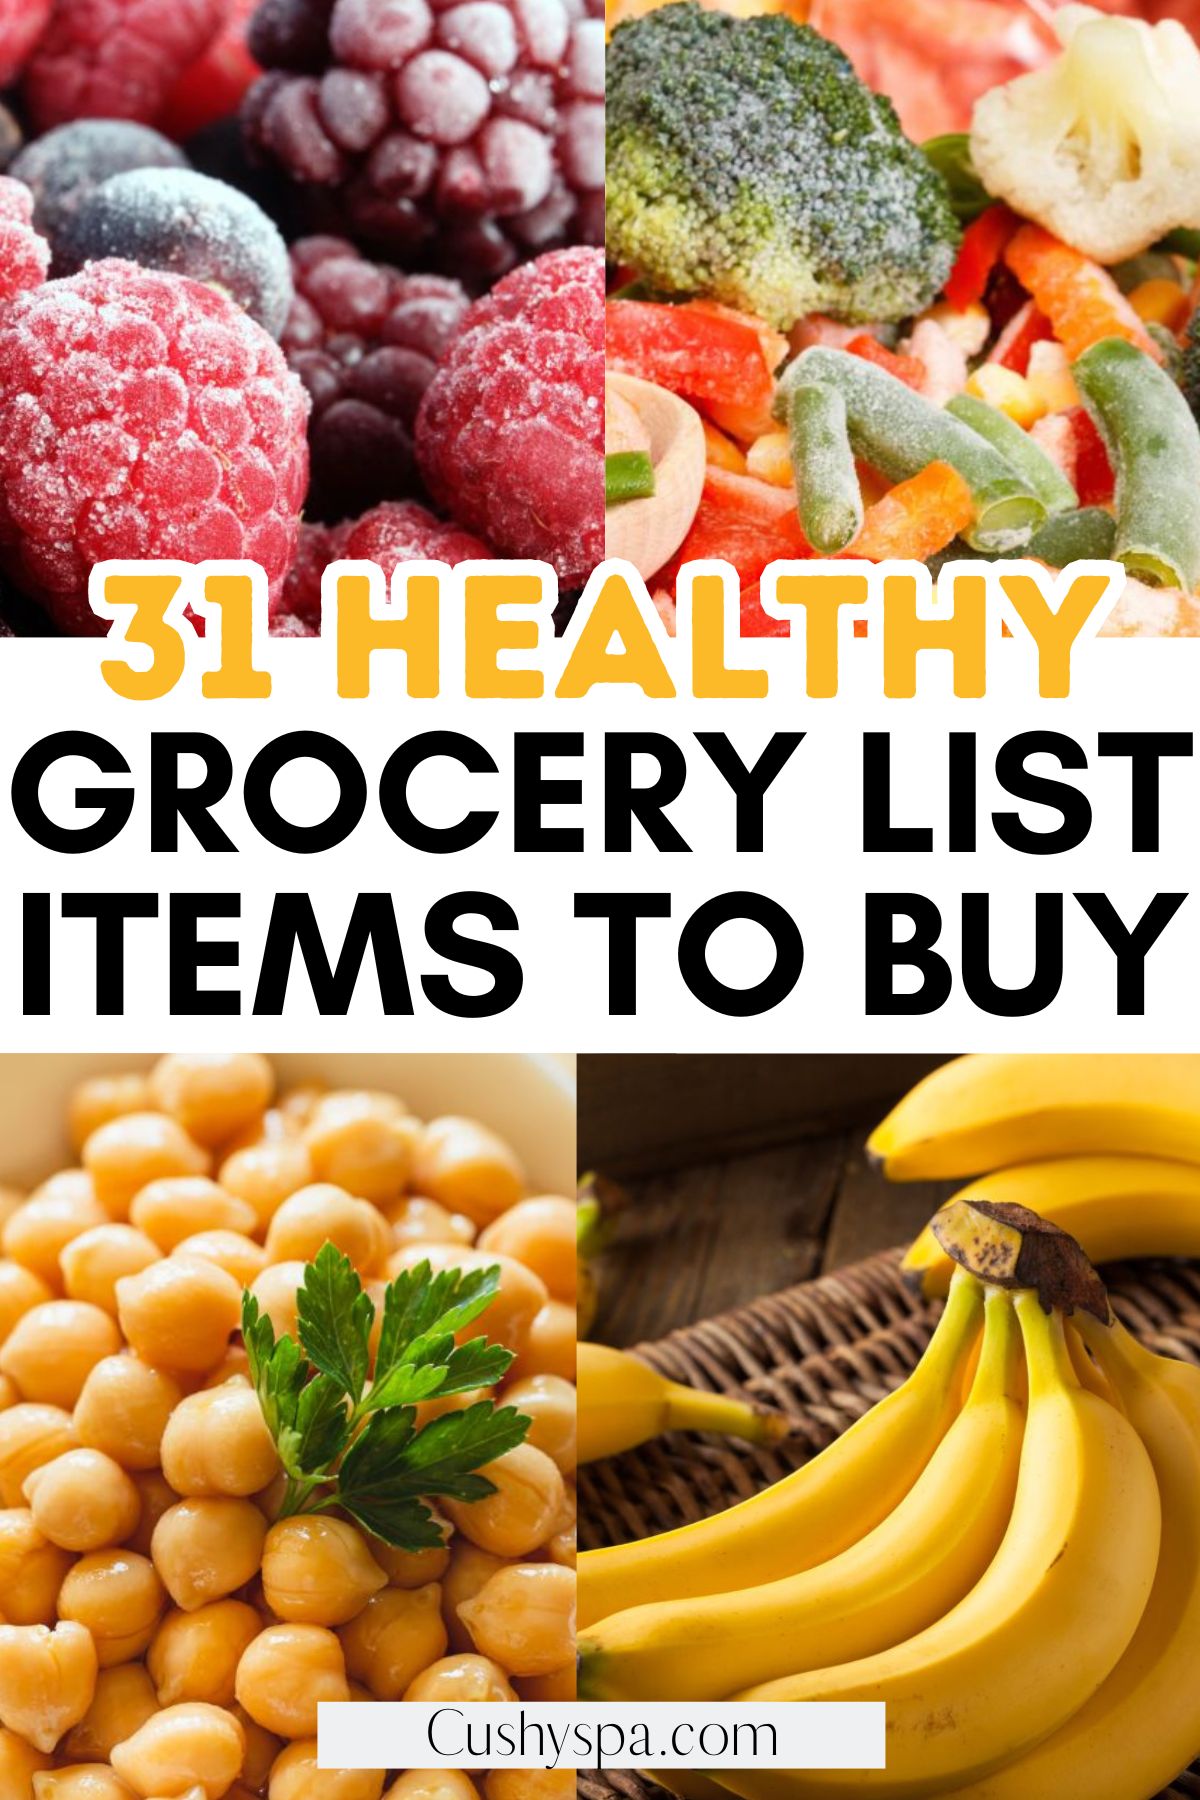 Healthy Grocery List Items to buy